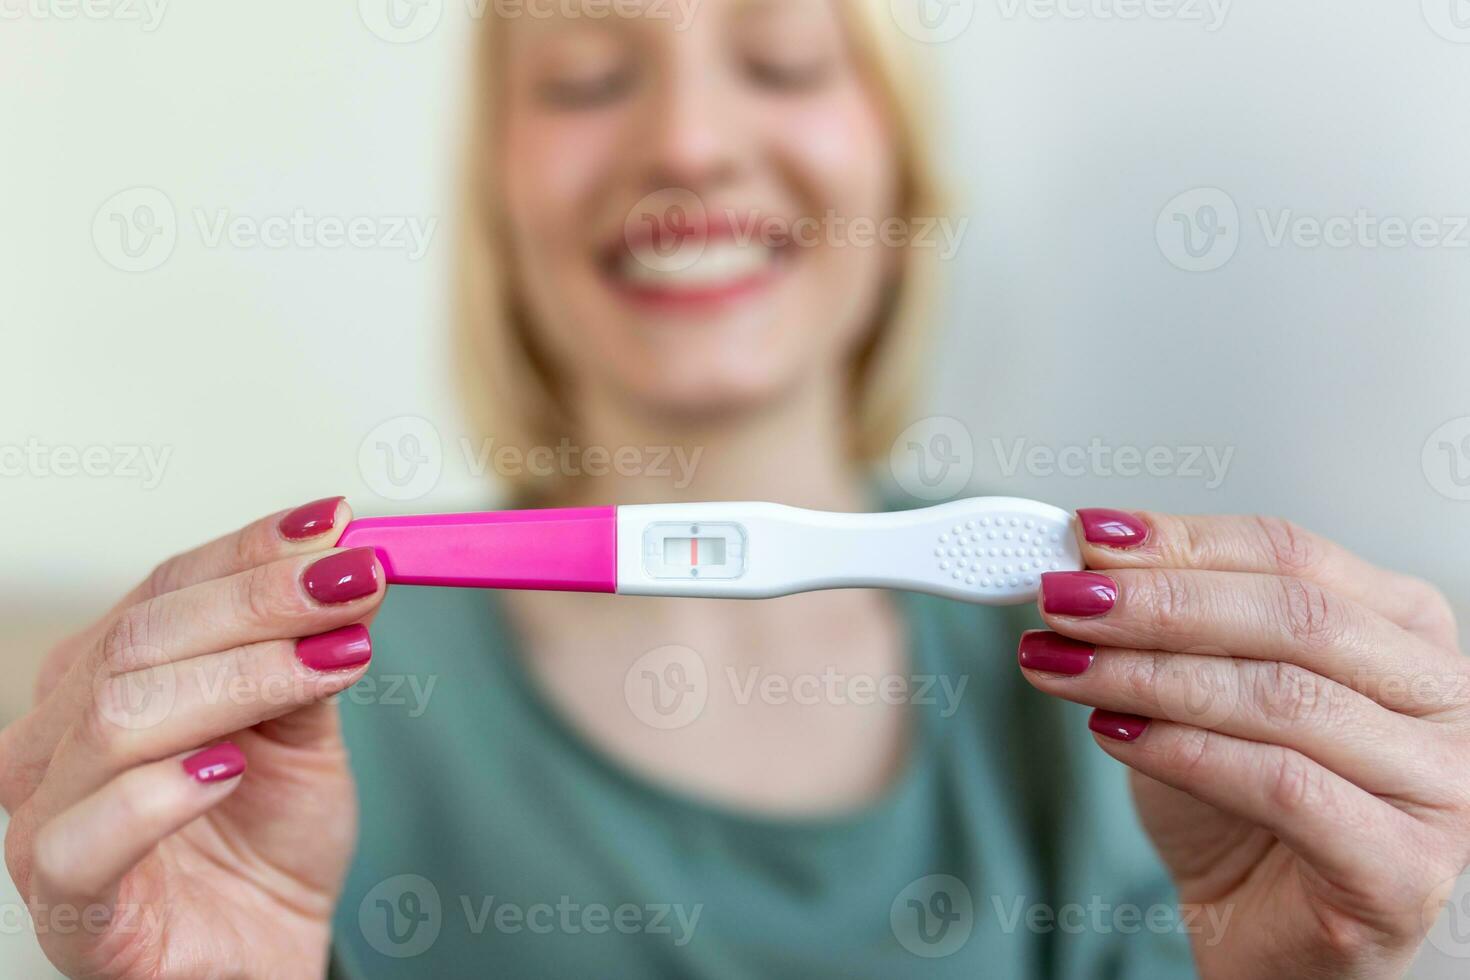 Pregnancy, fertility, maternity and people concept - happy smiling woman looking at pregnancy test at home photo